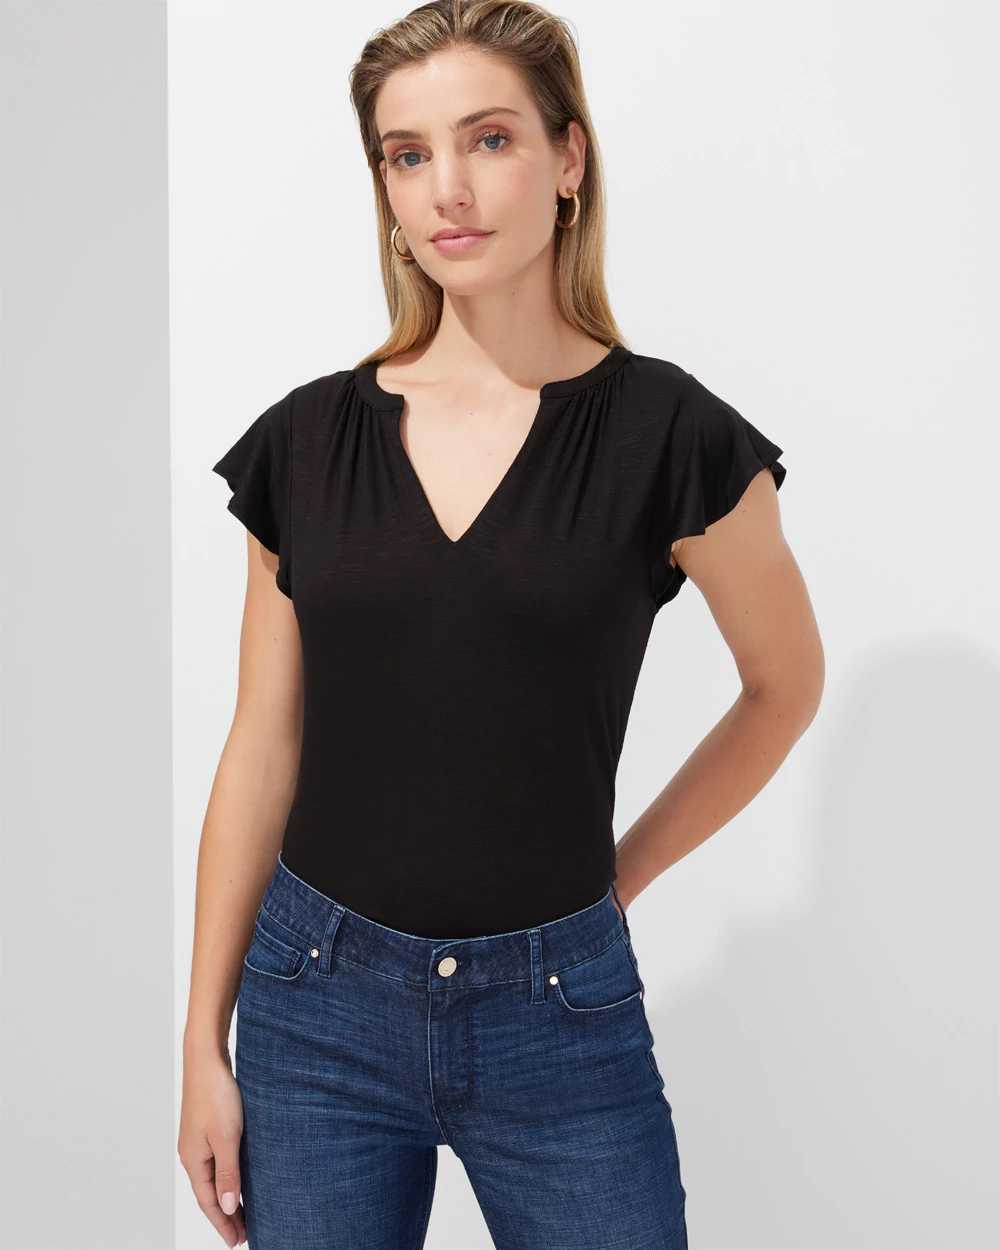 Outlet WHBM Notch-Neck Ruffle-Sleeve Tee